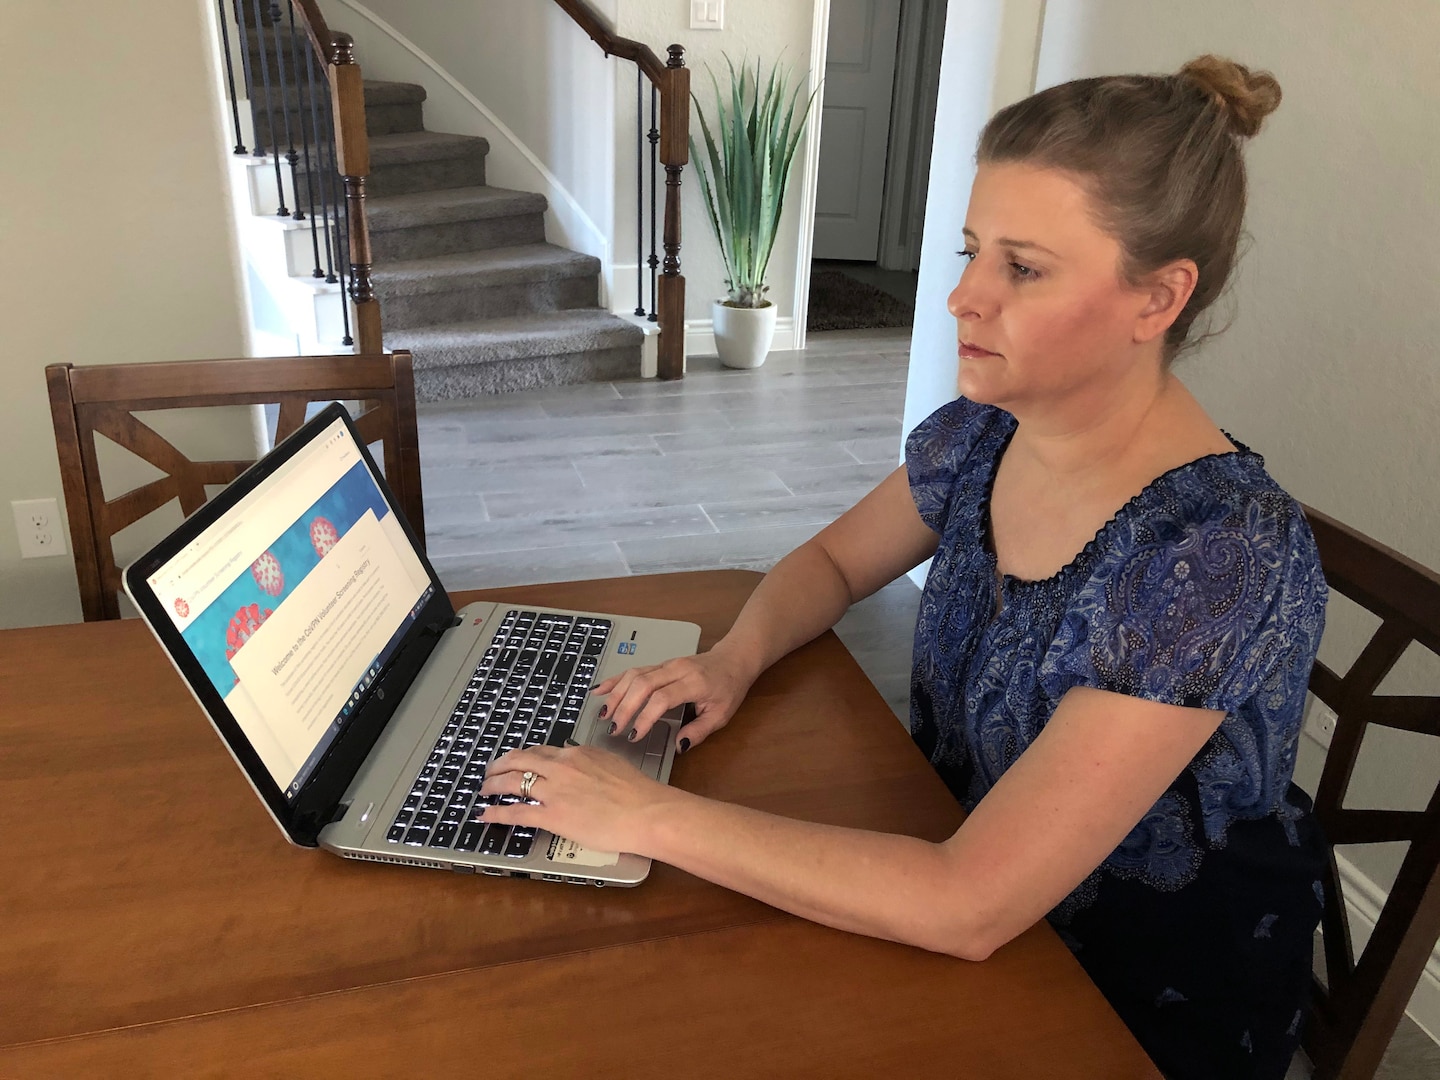 Marcy Edwards, a Military Health System beneficiary, signs up for Operation Warp Speed Nov. 2. Operation Warp Speed is a national initiative to accelerate the development, production and distribution of COVID-19 vaccines, therapeutics and diagnostics.